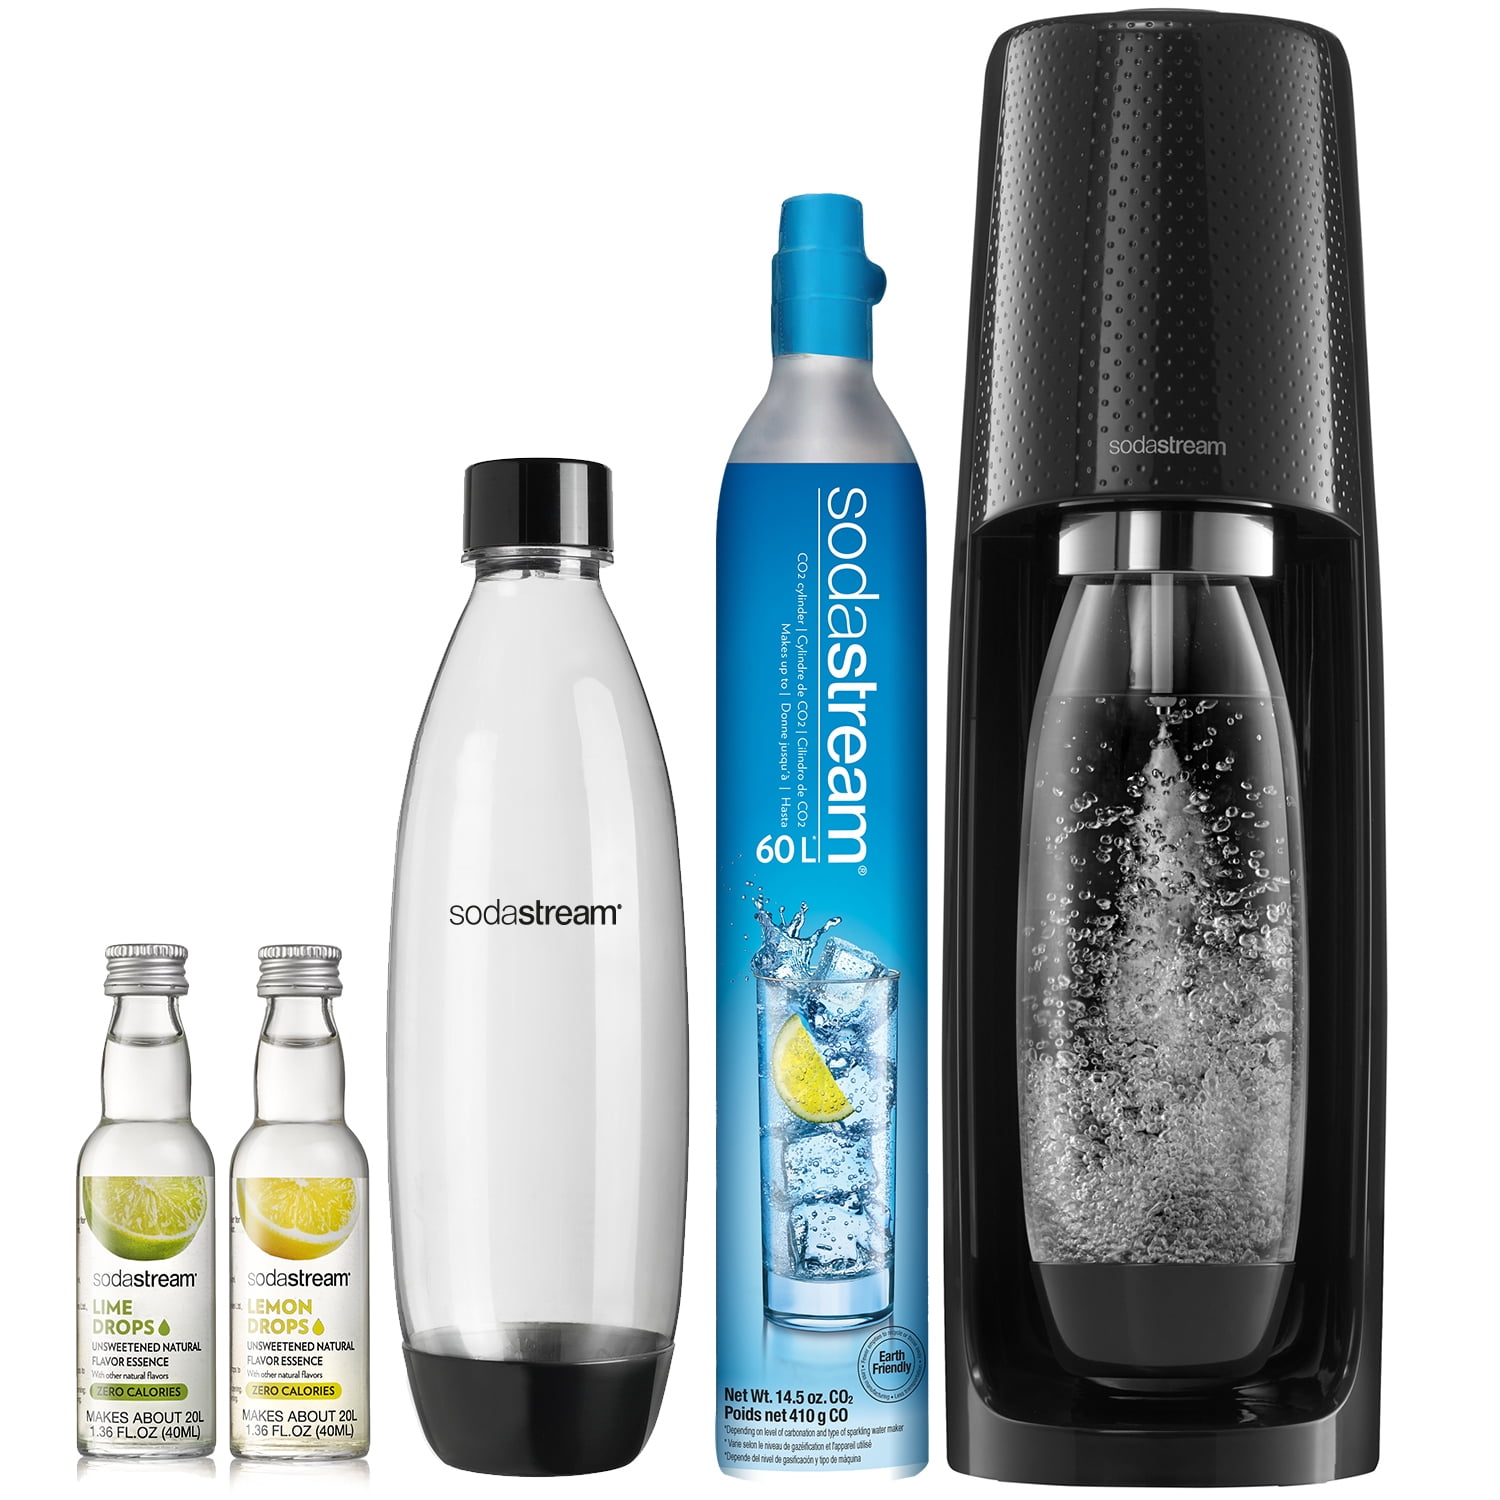 with CO2 and BPA free Bottle /& 1L Classic Black Carbonating Bottles Twin Pack Black SodaStream Fizzi Sparkling Water Maker